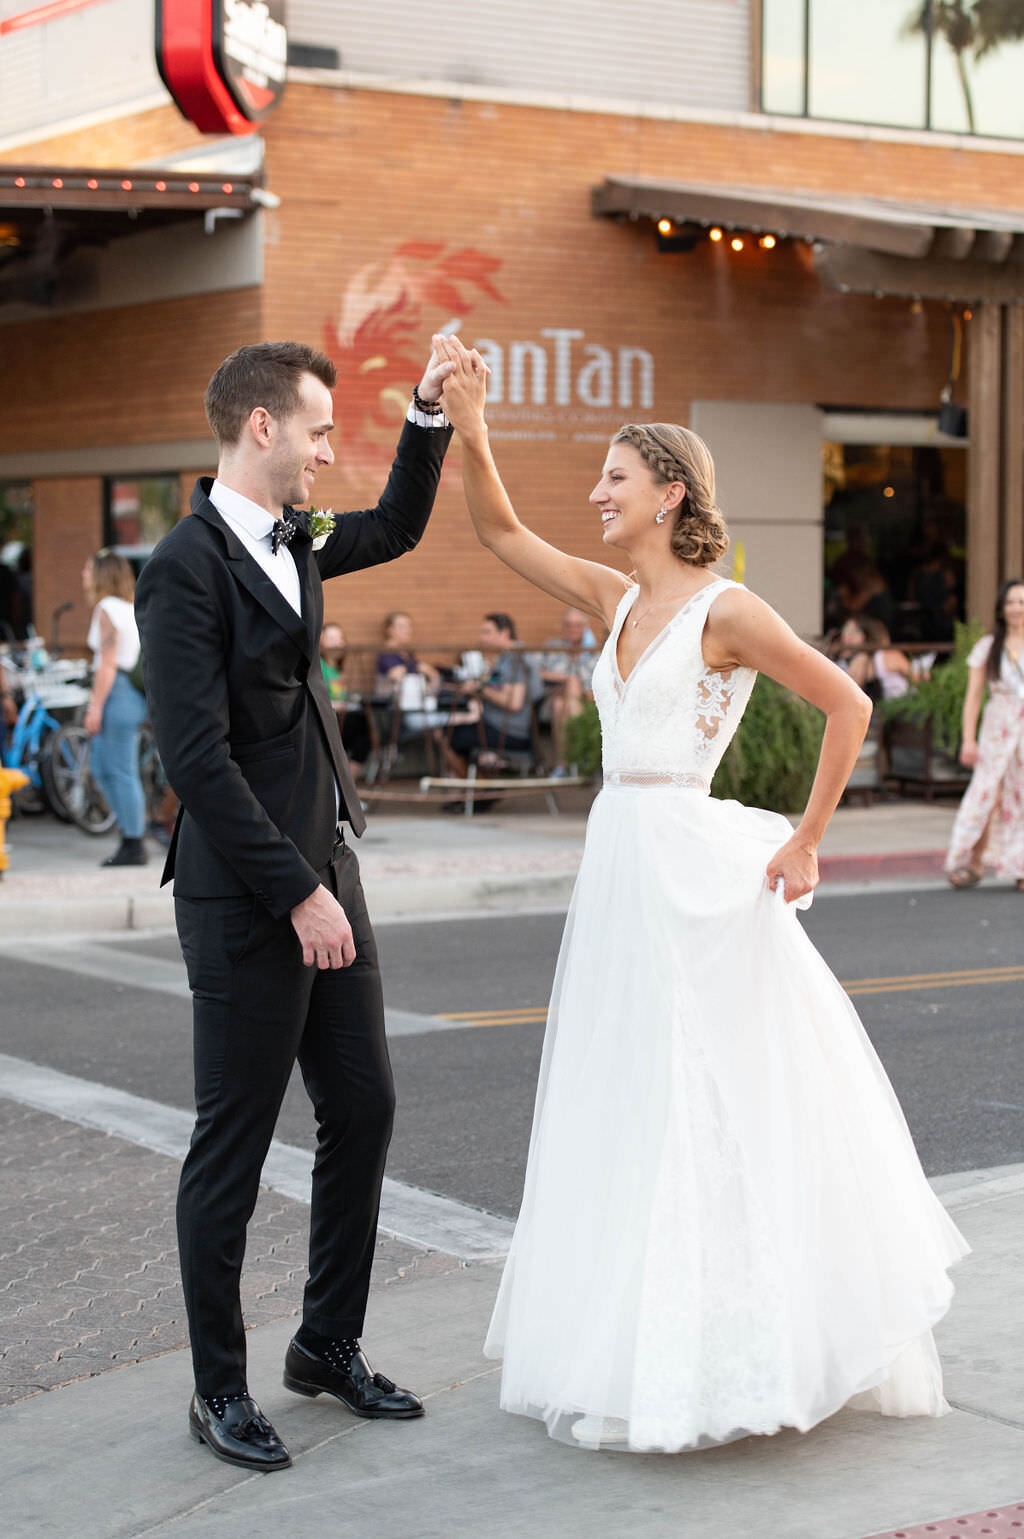 A bride and groom dancing together on a sidewalk.